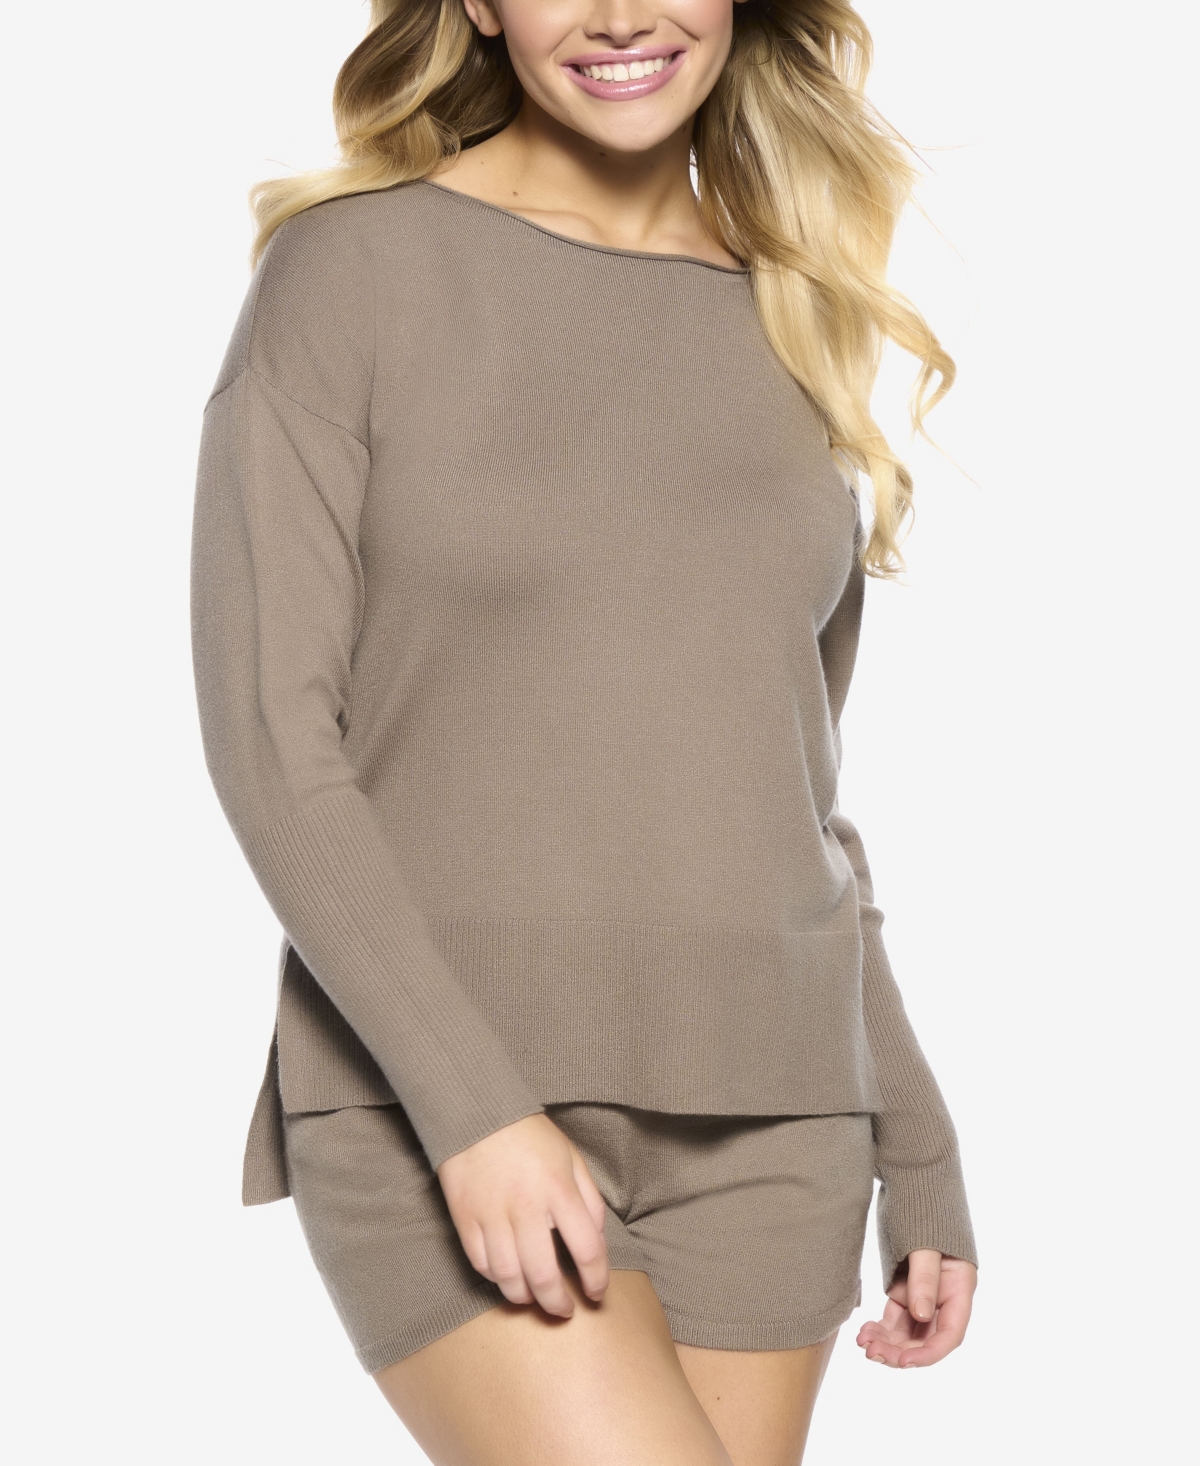 Voyage Textured Sweater Knit Lounge Top - Driftwood